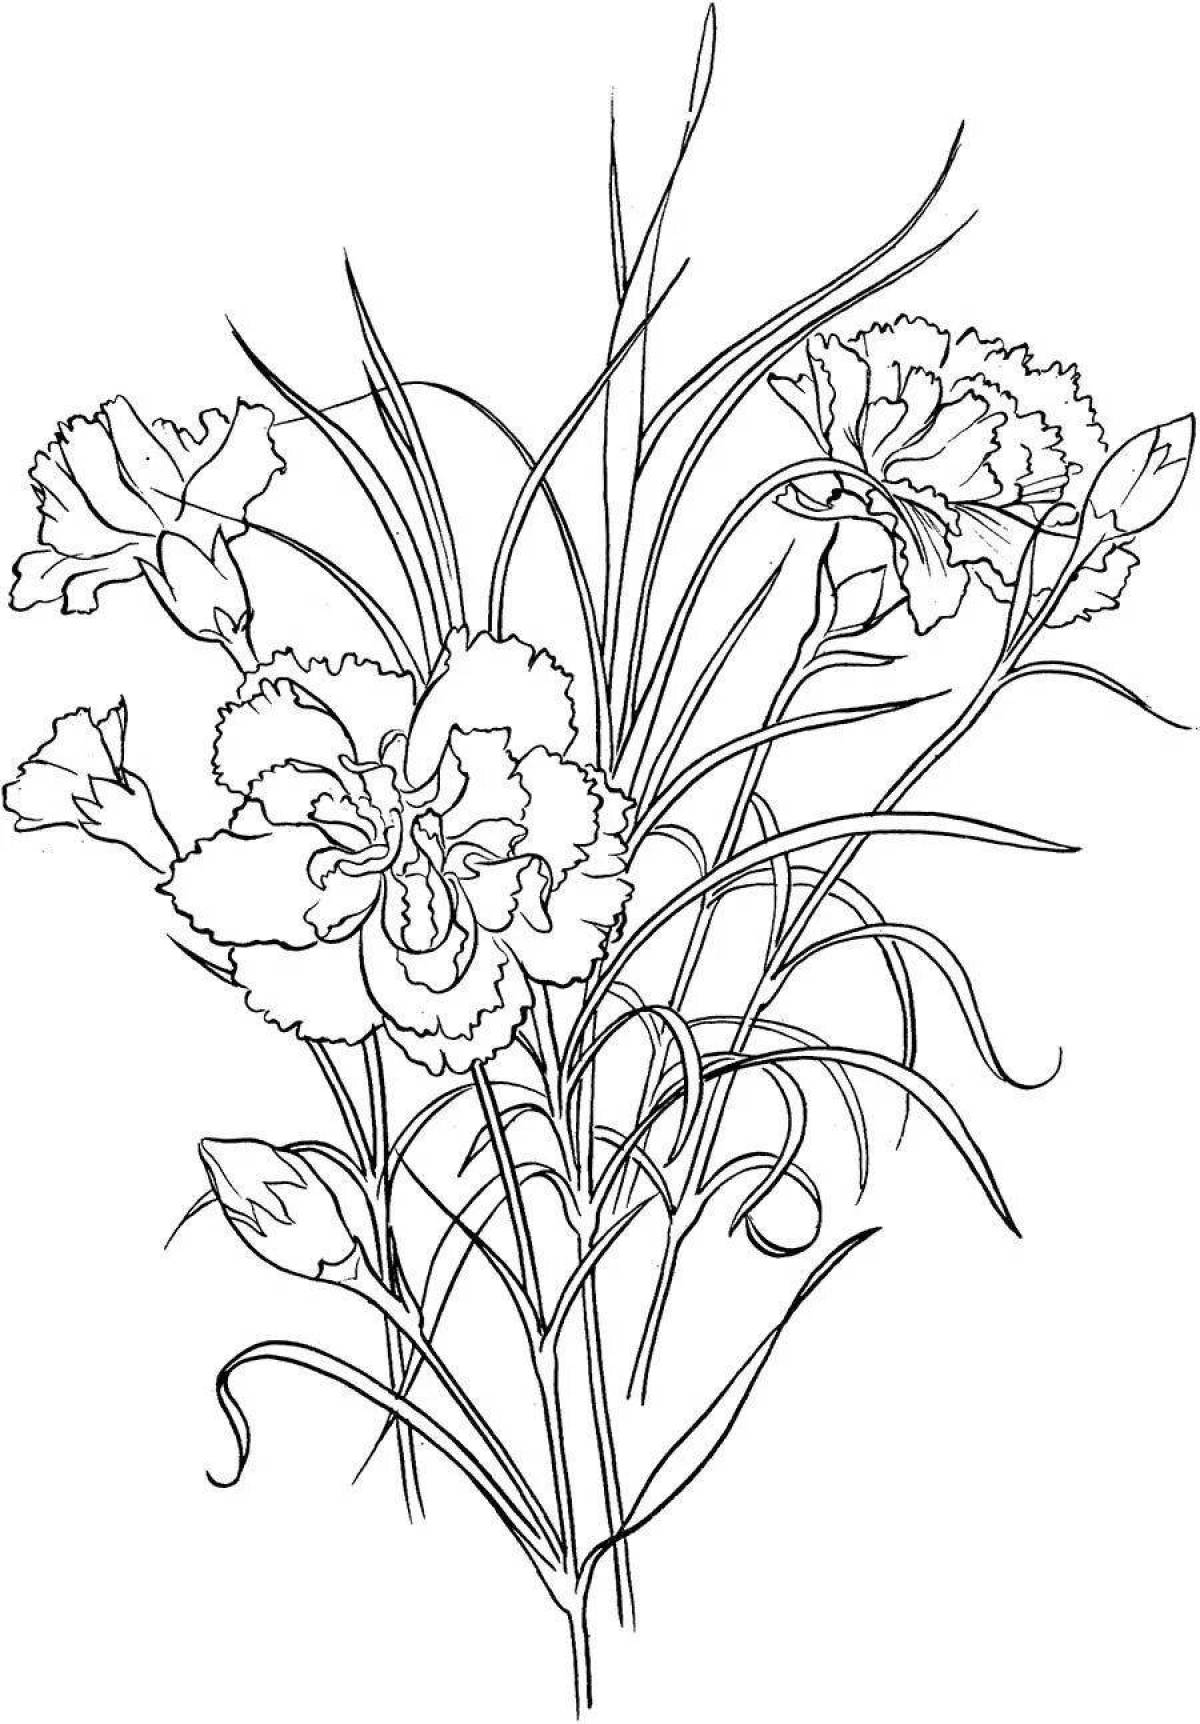 Intricate coloring of carnation flowers